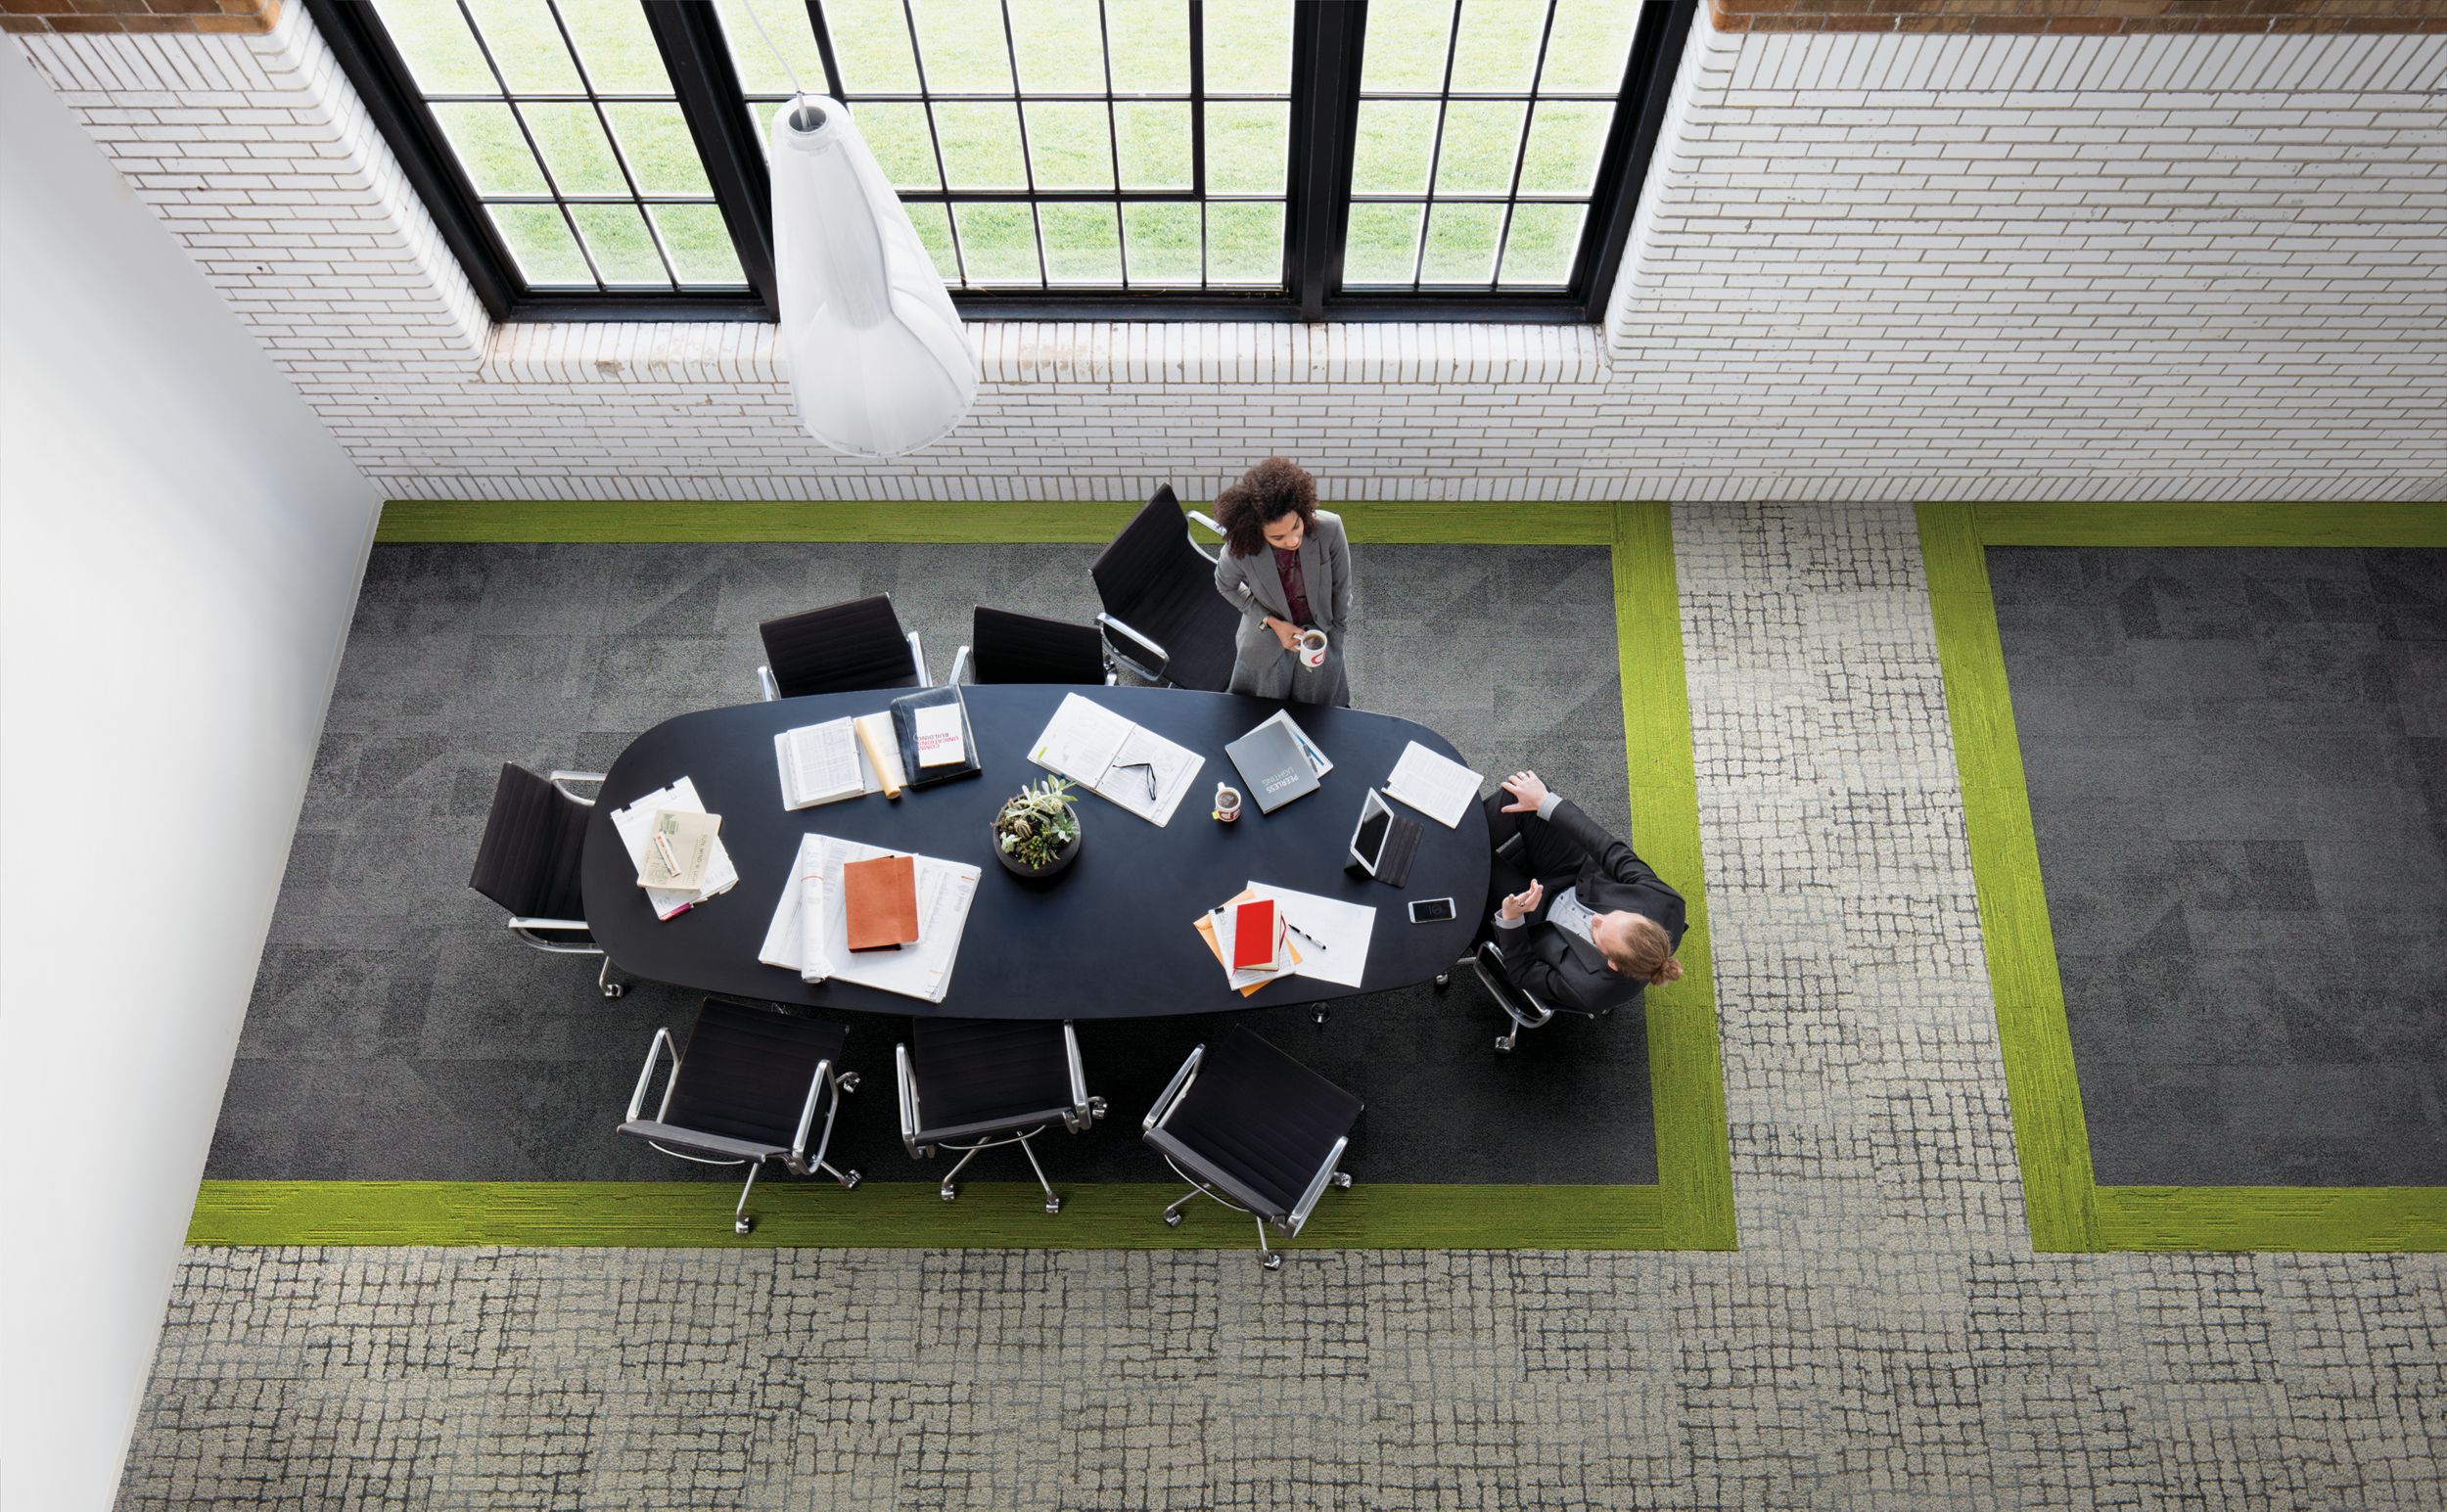 Interface Paver and Sett in Stone carpet tile with UR501 plank carpet tile in overhead view of meeting area with man and women conversating afbeeldingnummer 3